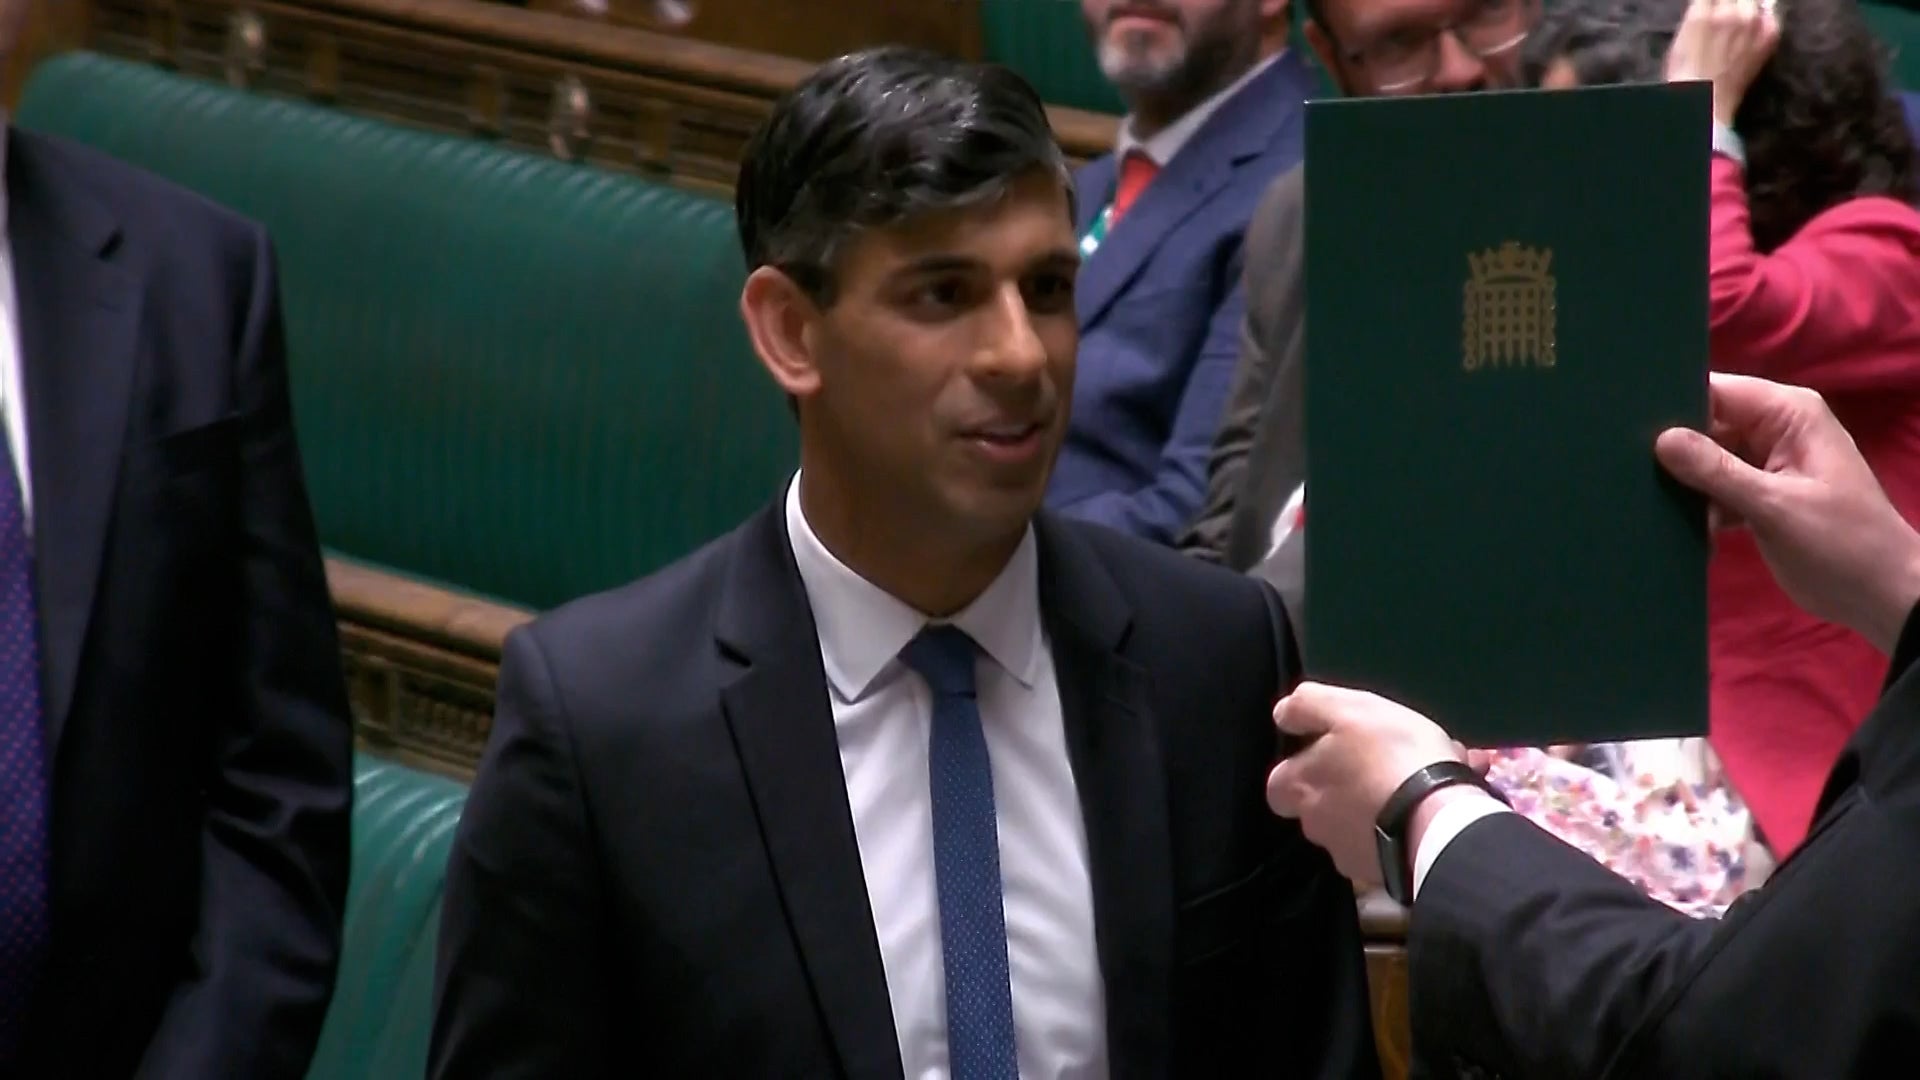 Former prime minister Rishi Sunak is sworn in as a member of parliament